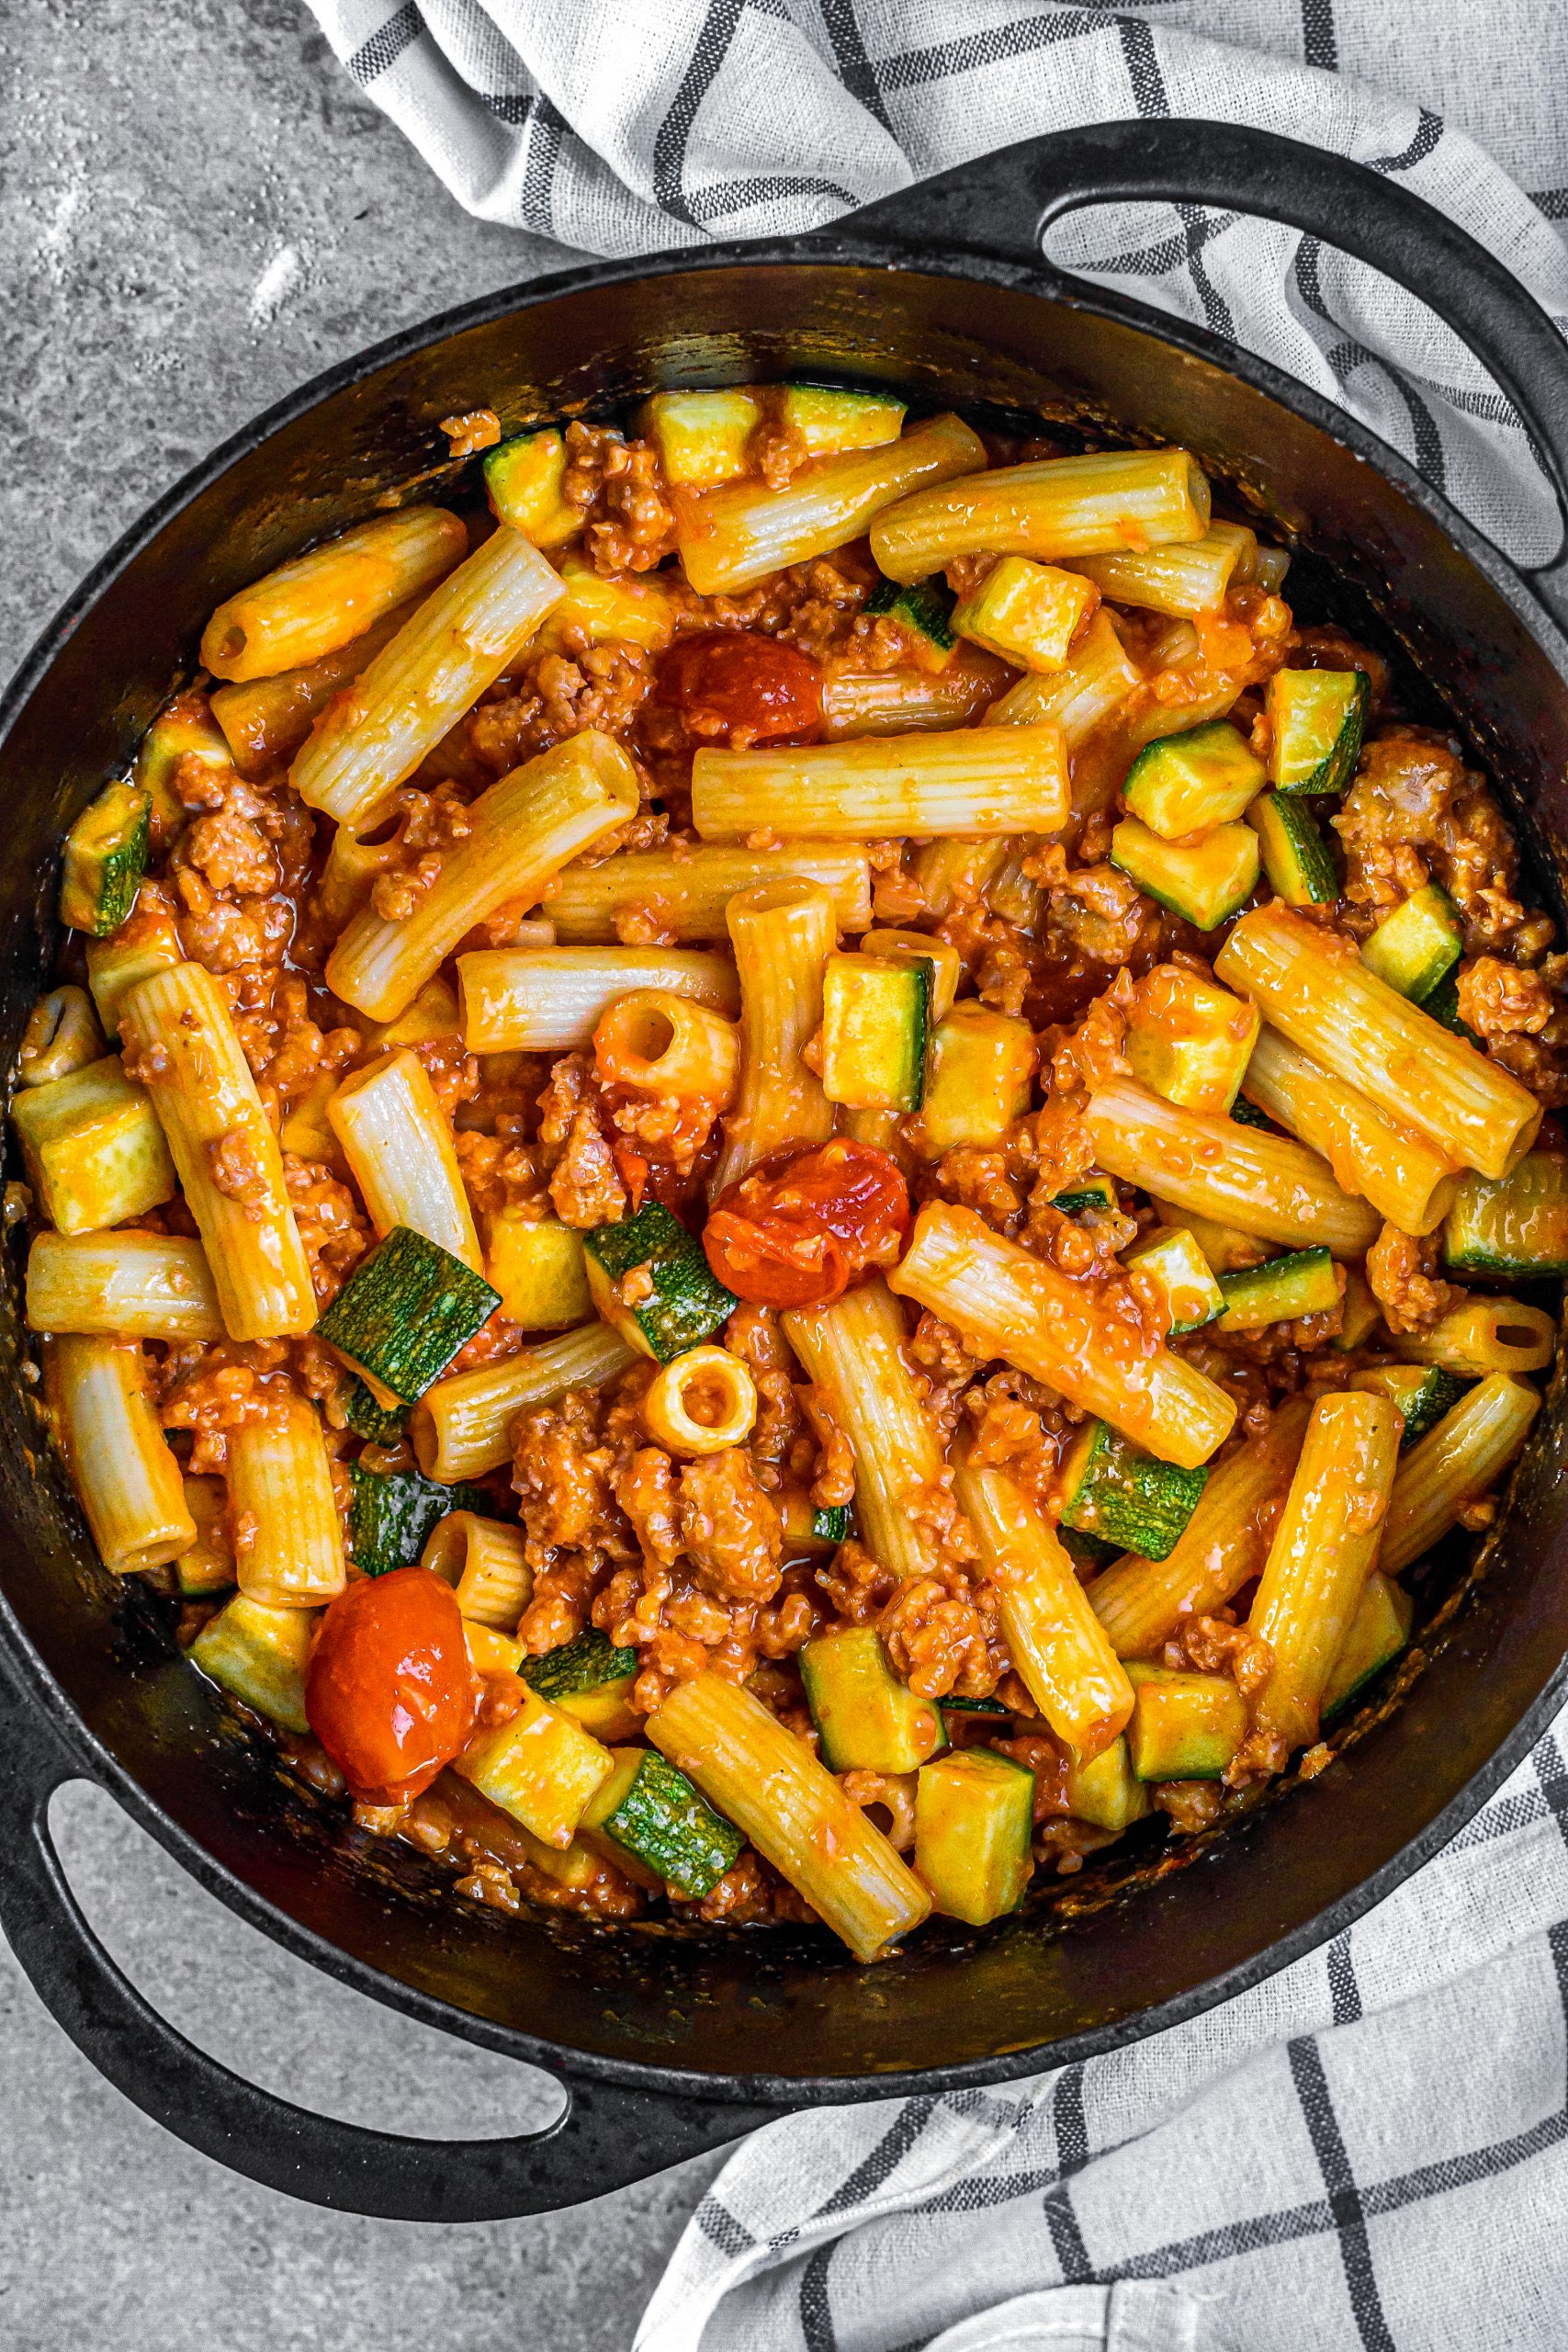 Mix the pasta into the skillet, and toss to combine the ingredients well. Add some of the reserved pasta water if needed.